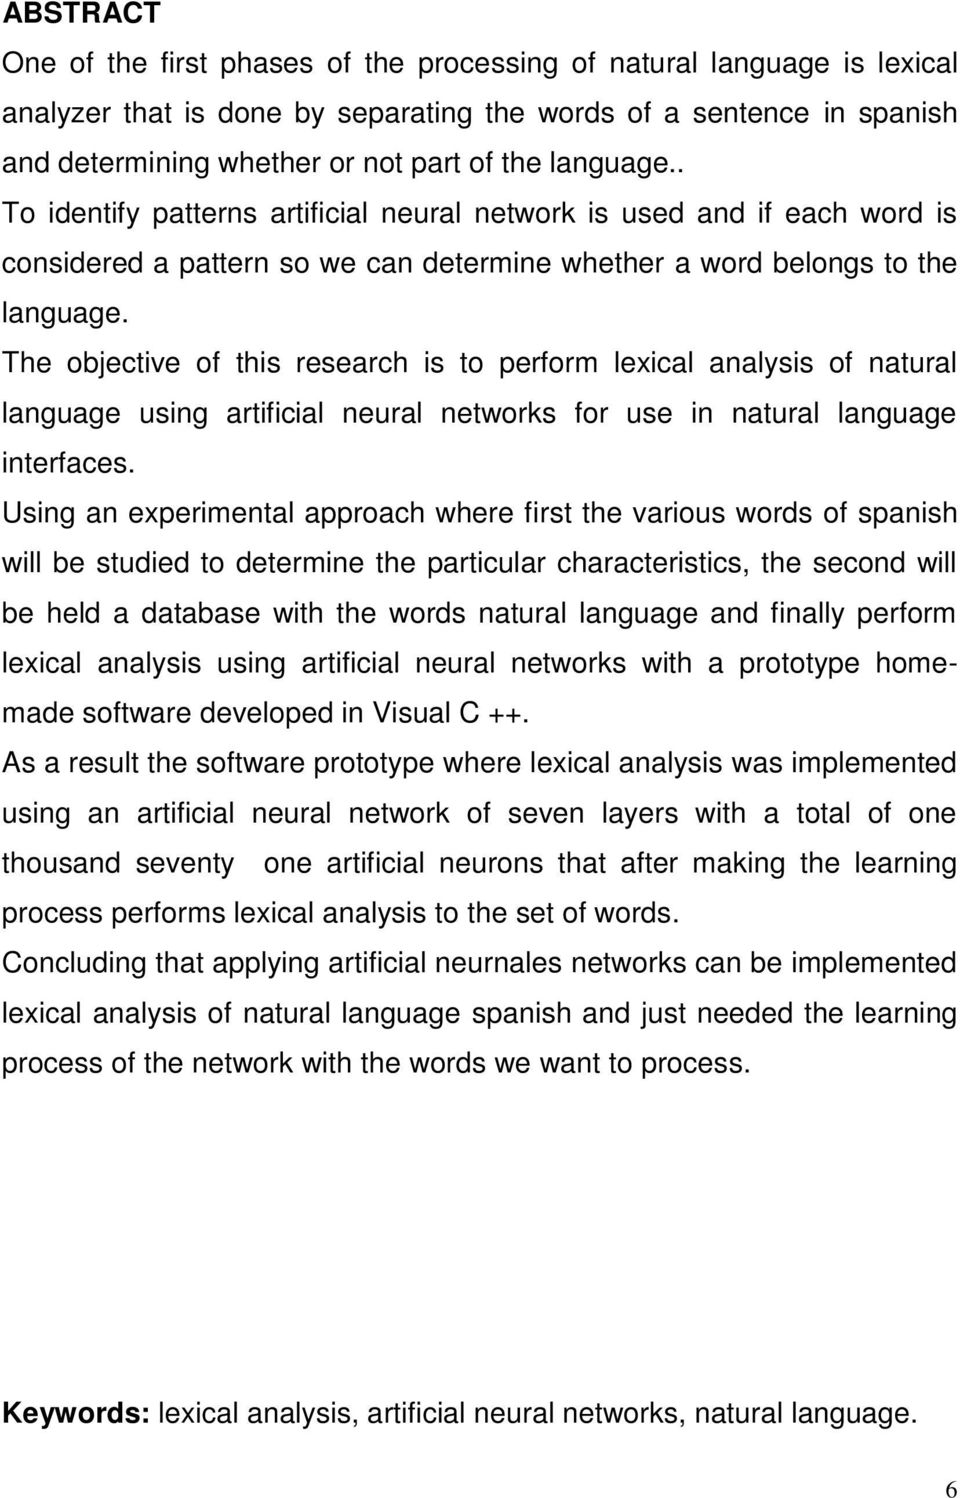 The objective of this research is to perform lexical analysis of natural language using artificial neural networks for use in natural language interfaces.